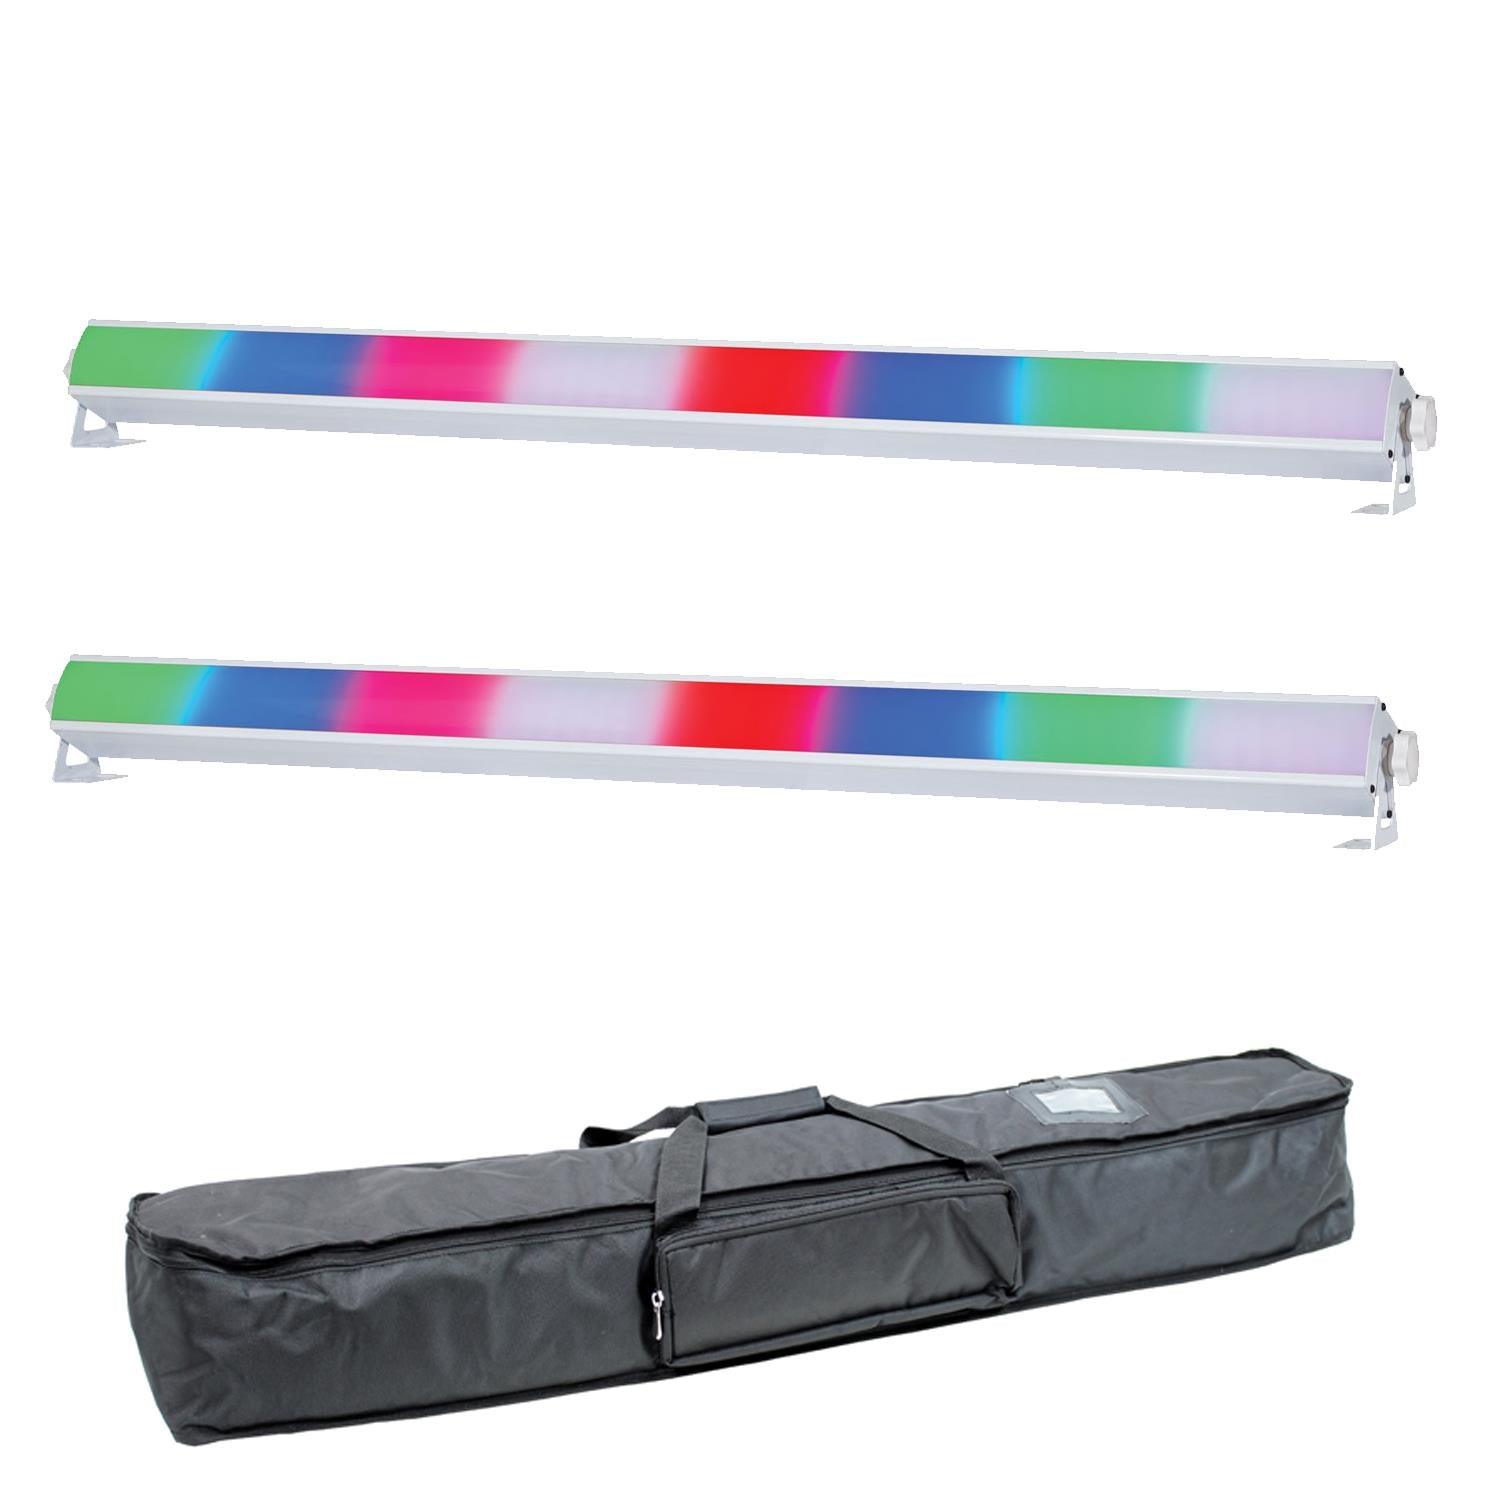 2 x Equinox Spectra Pix Battens White with Carry Bag - DY Pro Audio